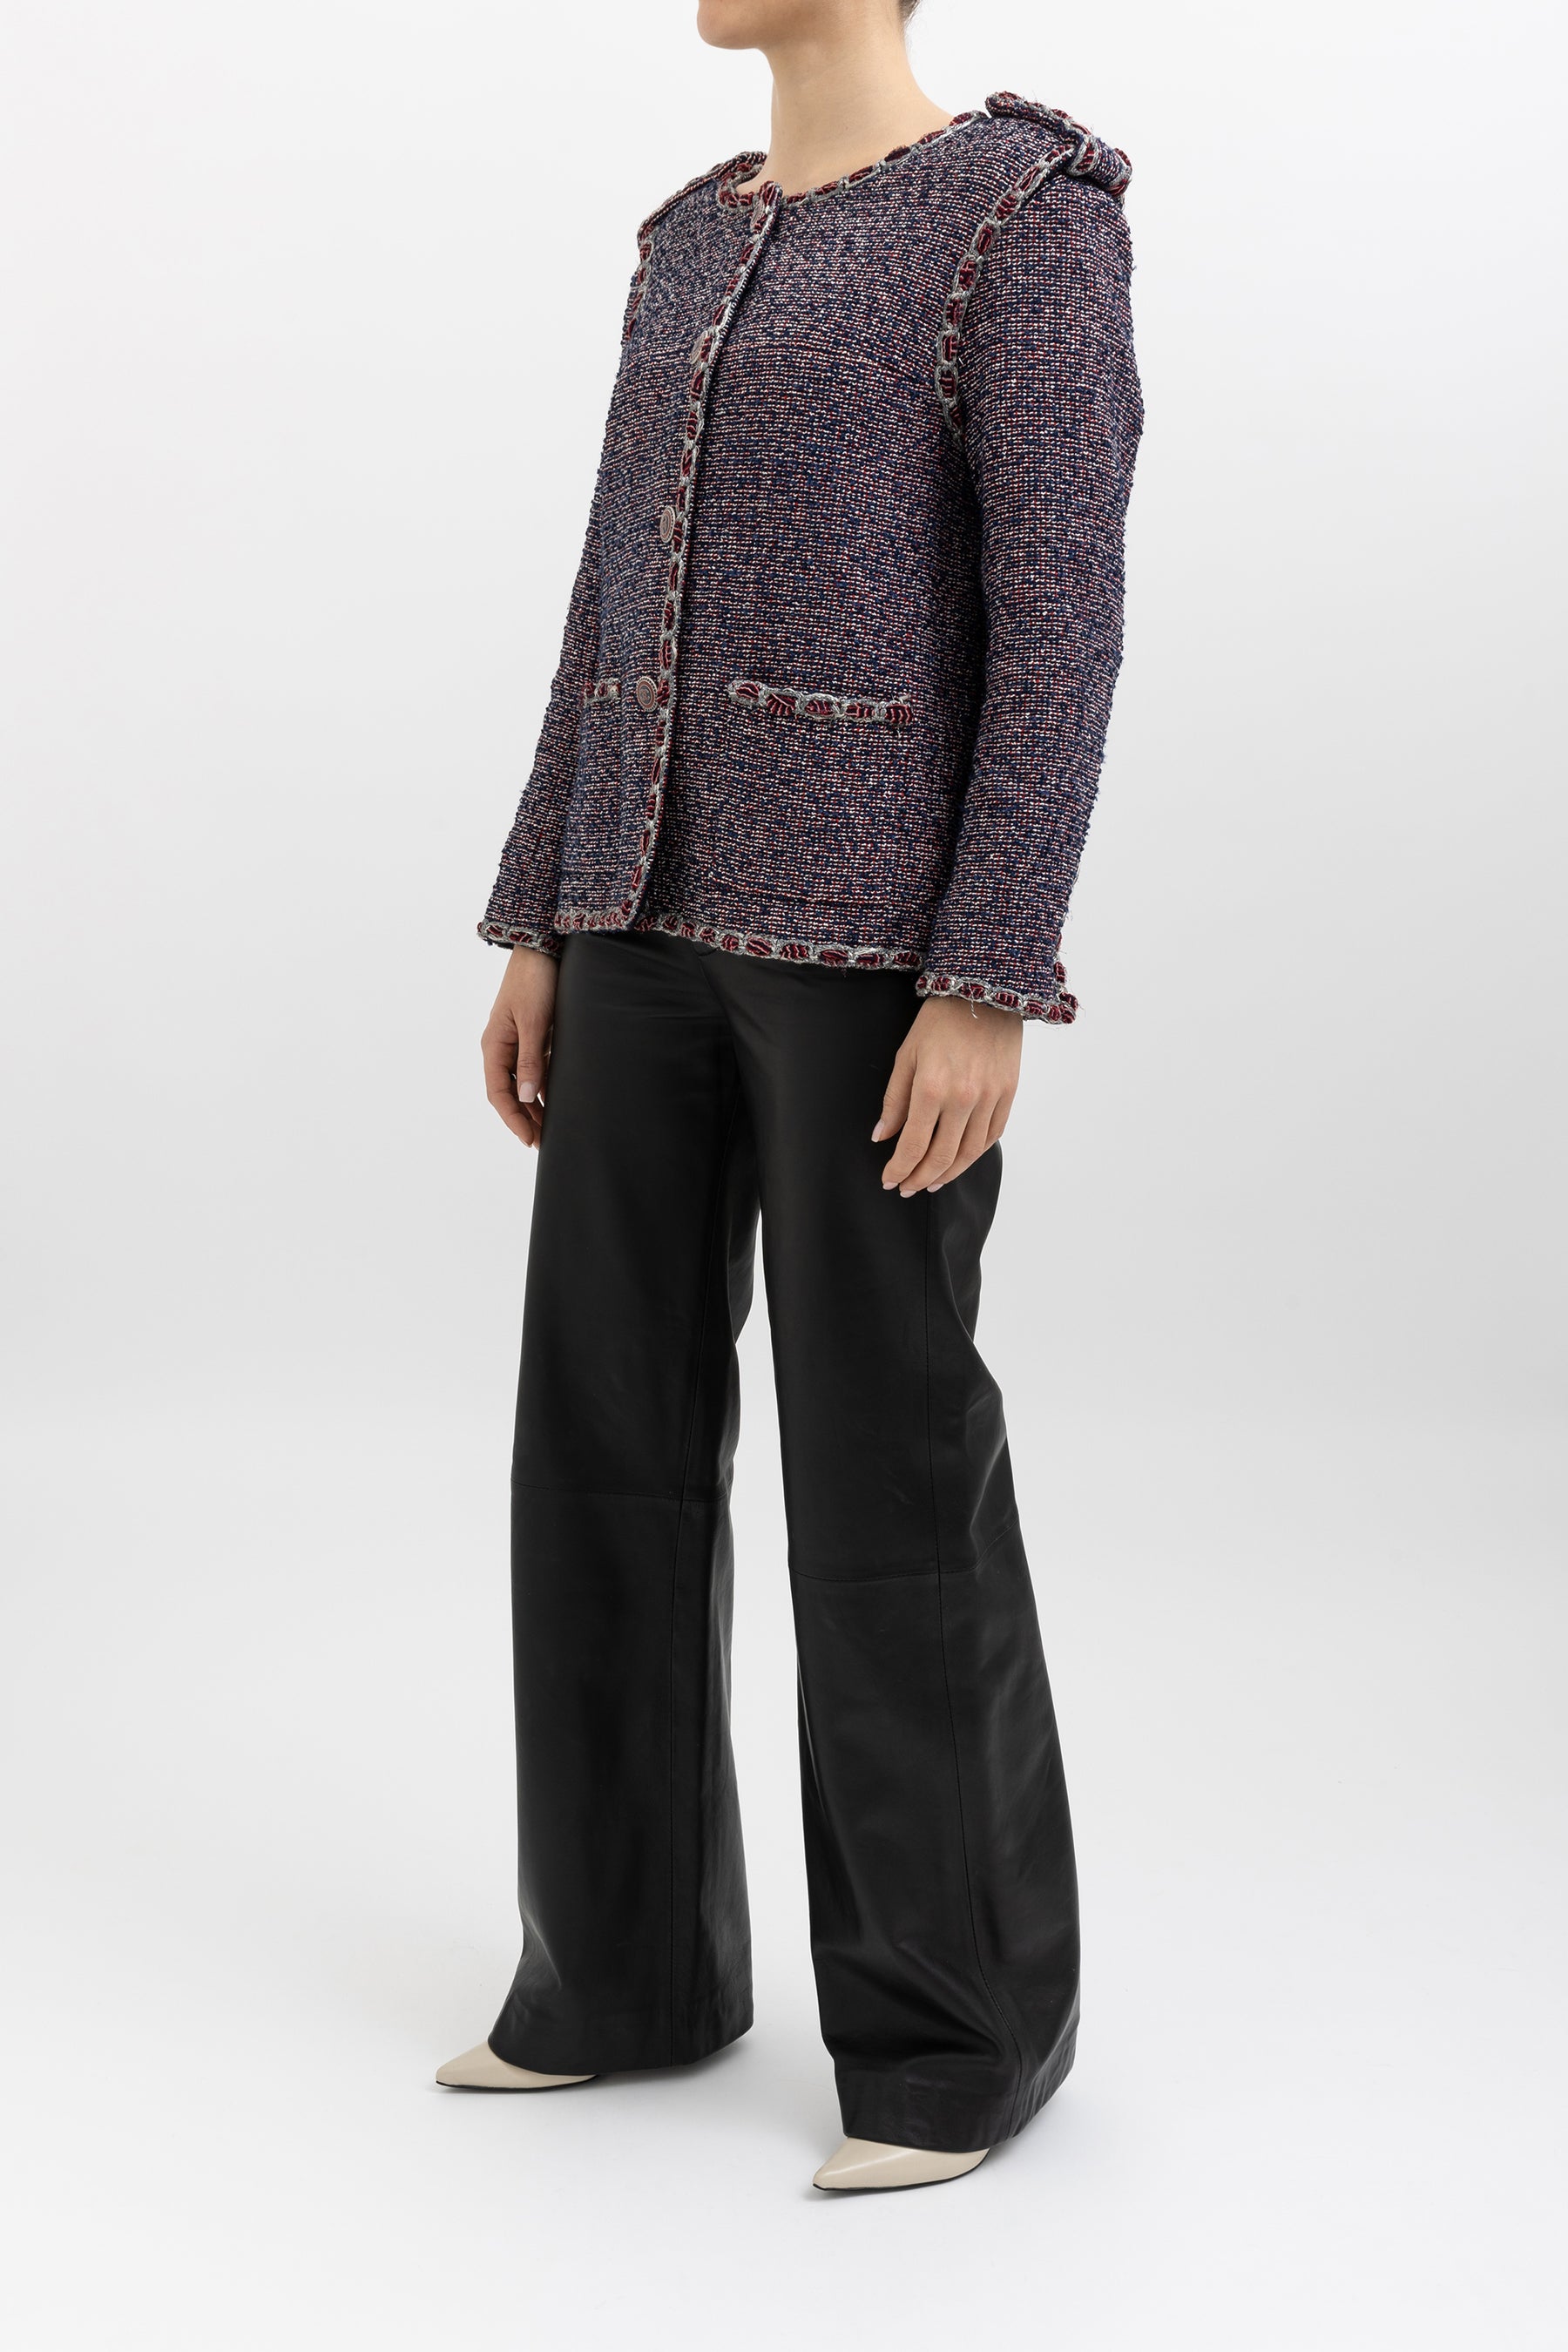 chanel-navy-and-red-tweed-jacket-with-silver-lurex-detailing-fr42-au14-7bee